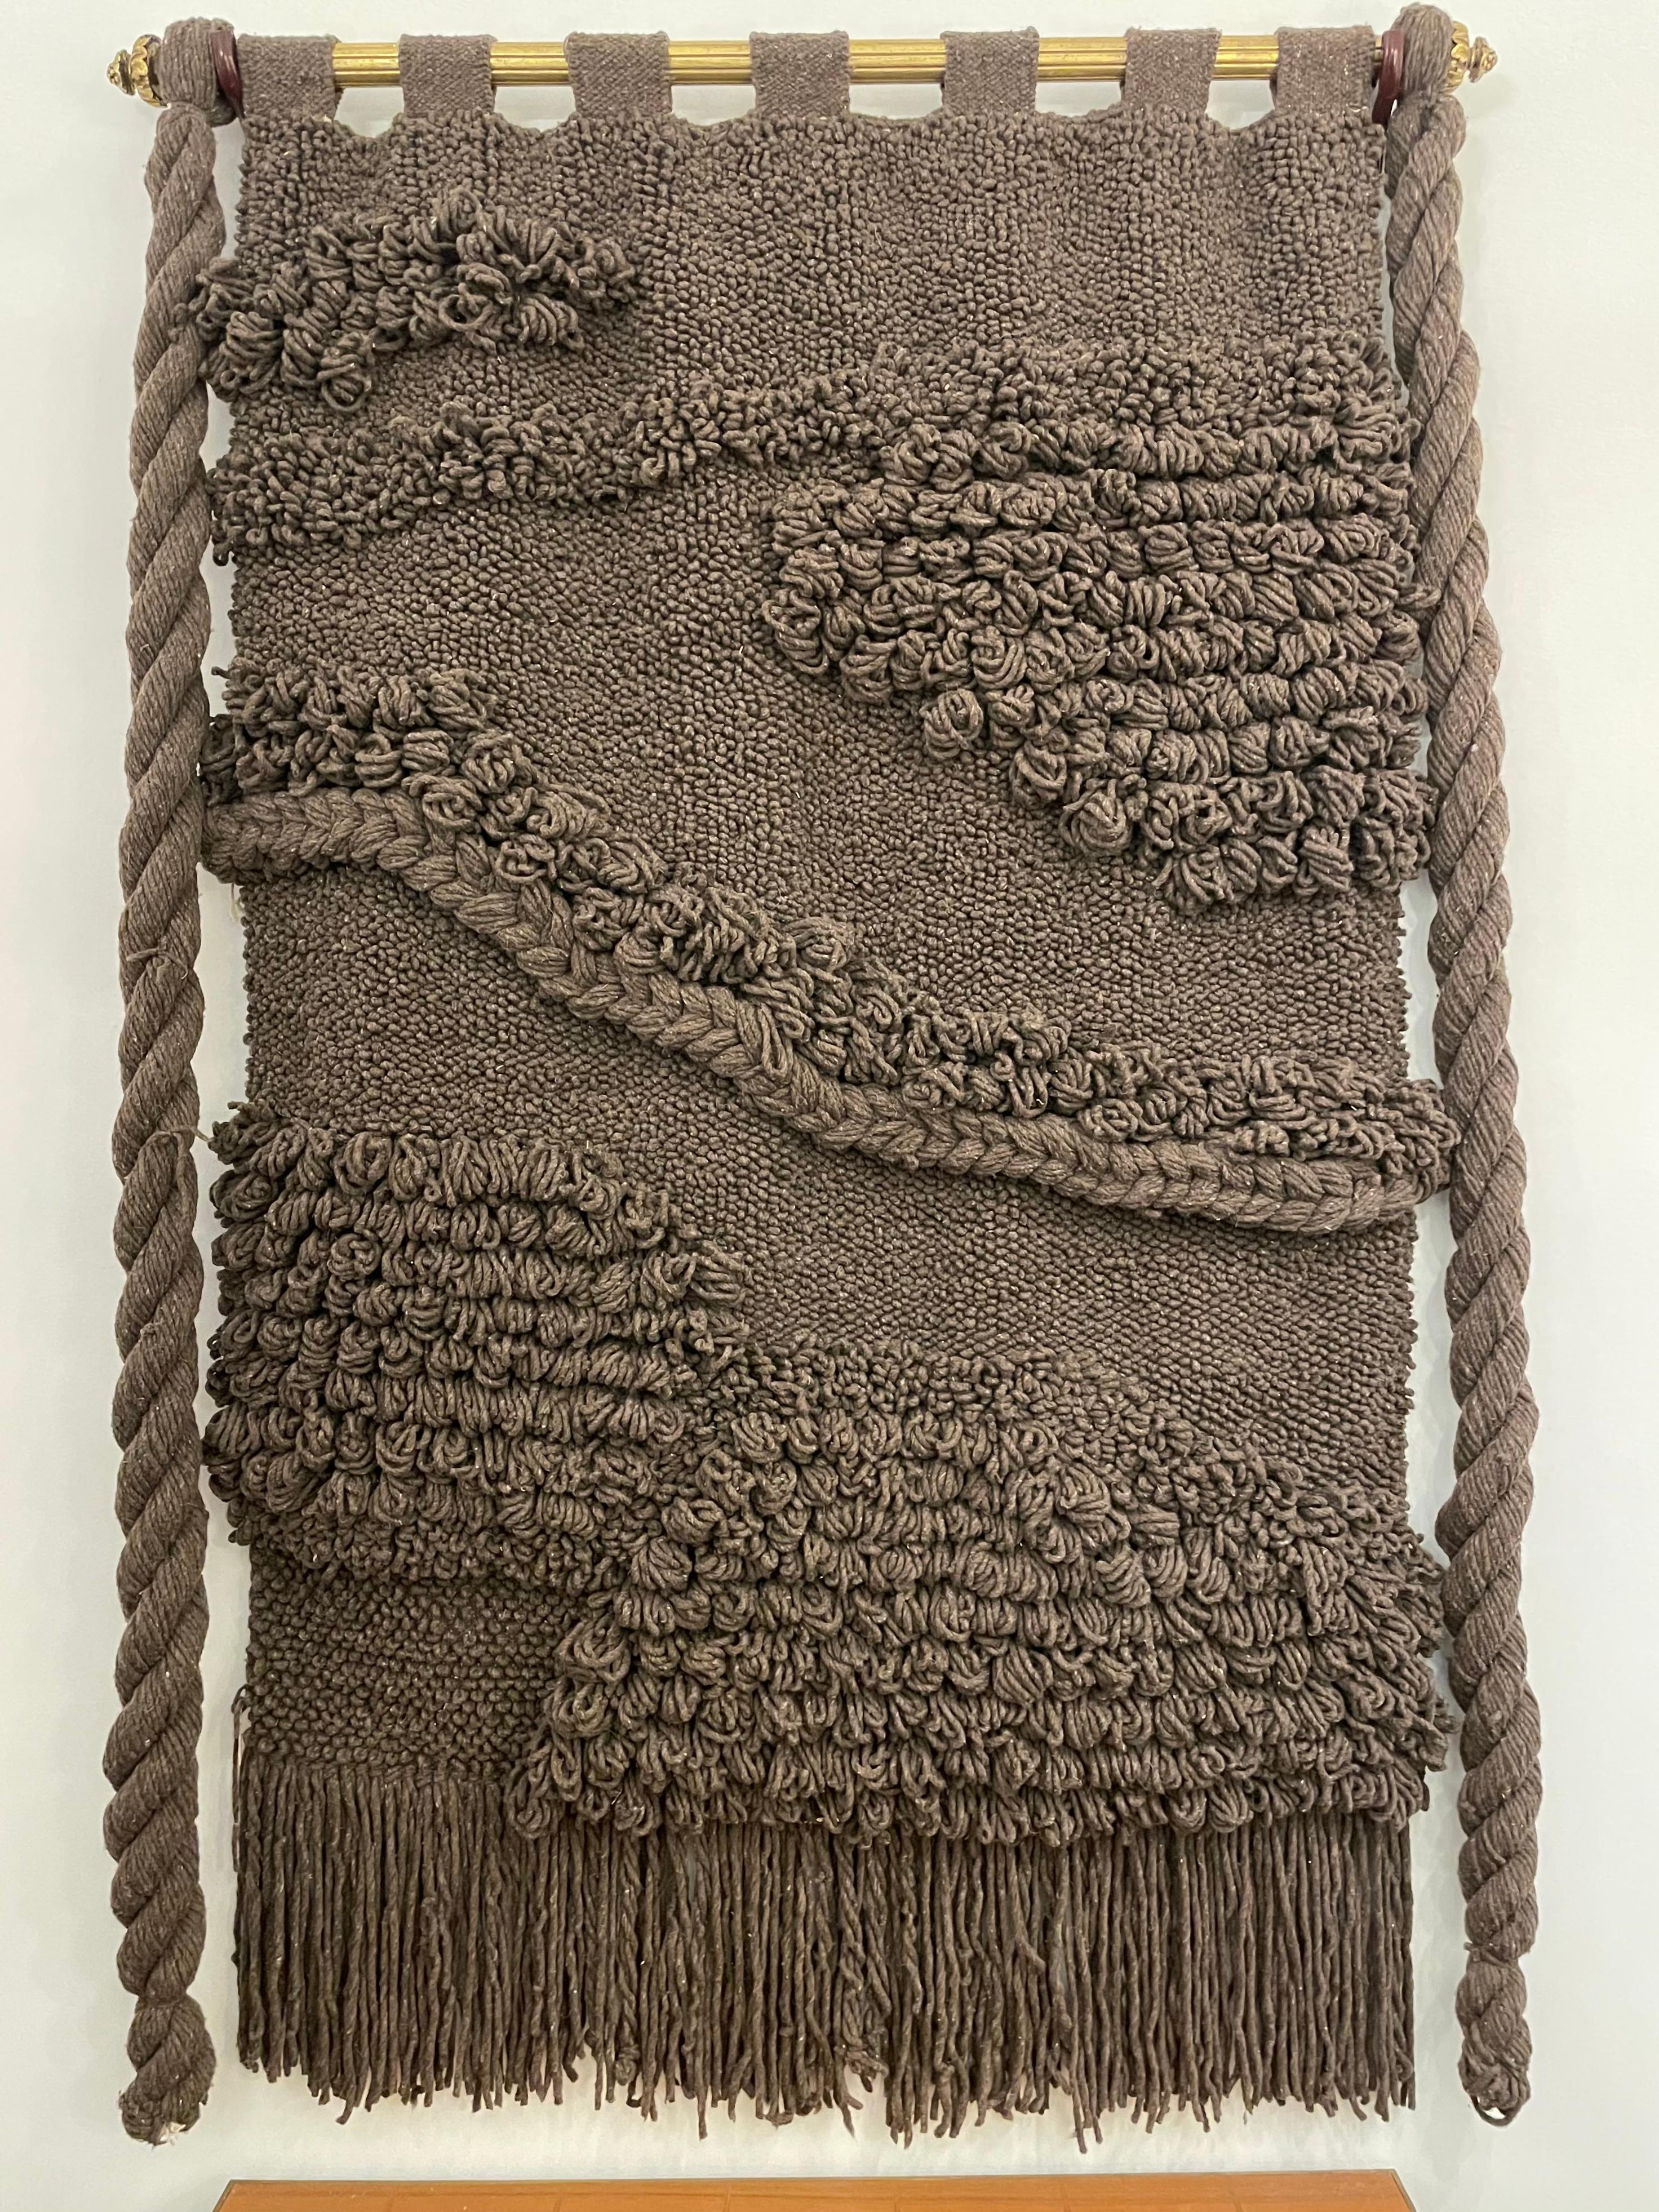 Huge Hand Woven Wool Wall Tapestry in Chocolate/Charcoal Tone For Sale 2